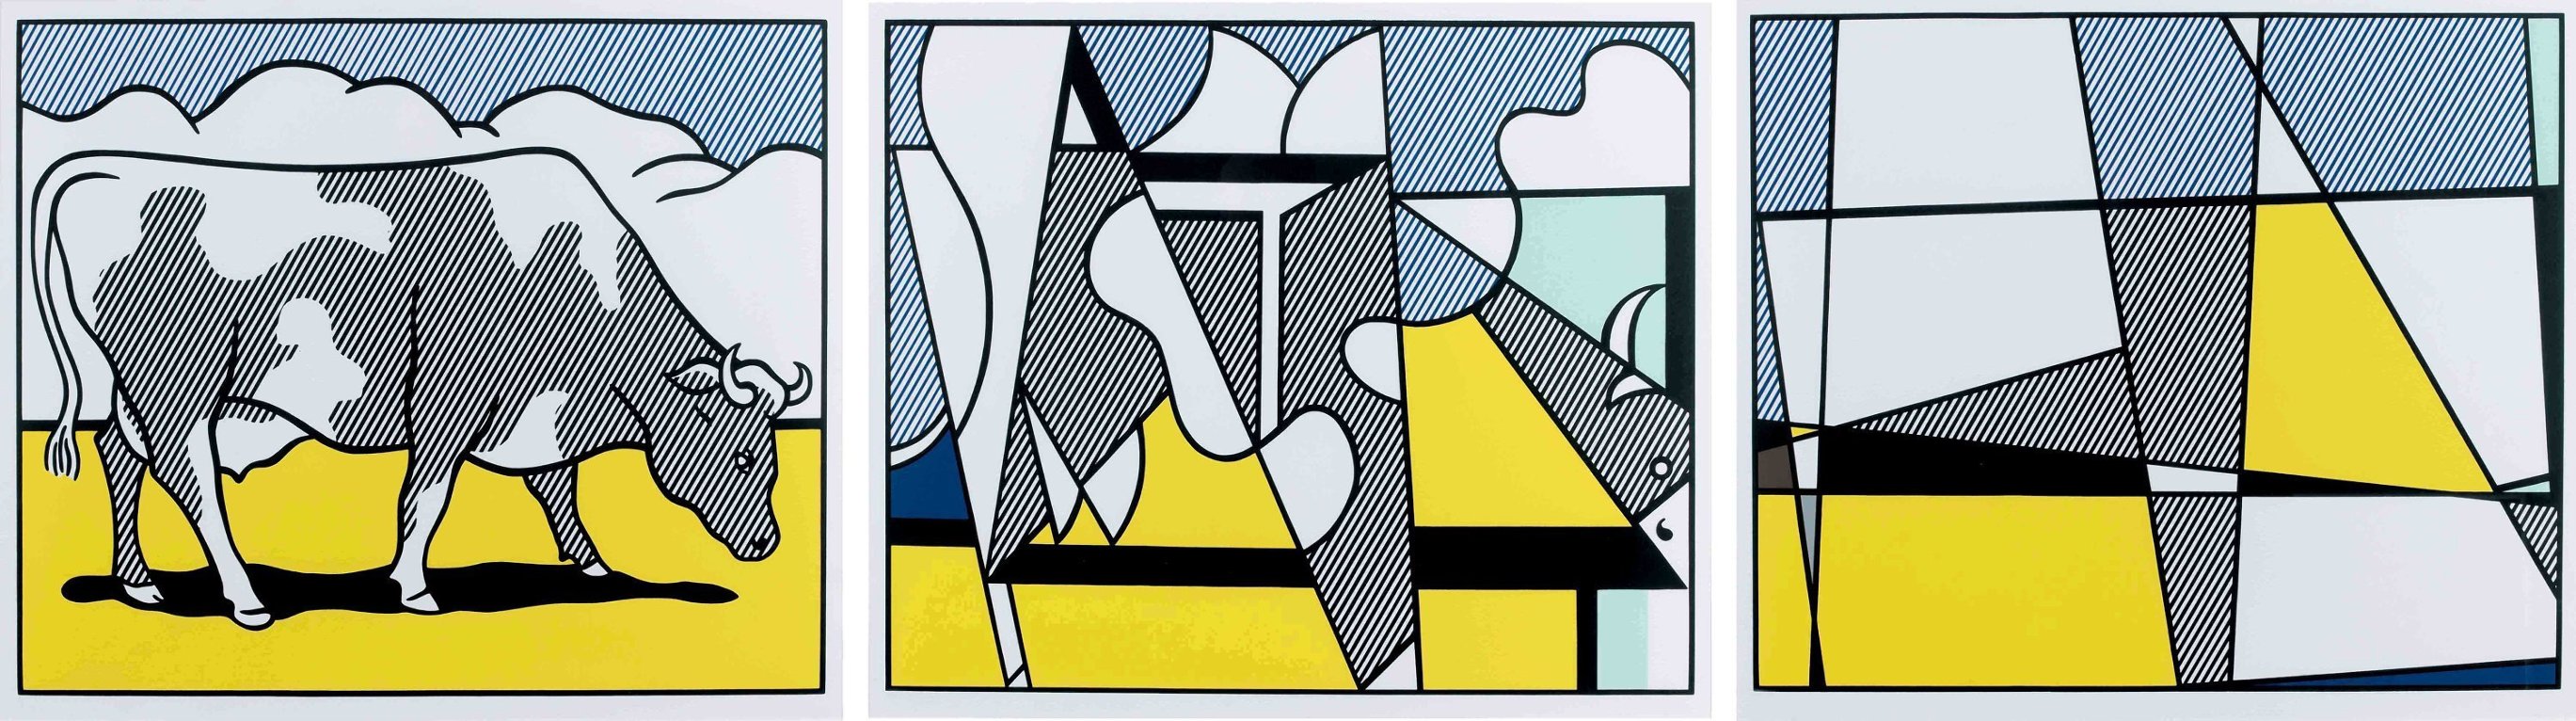 Cow Going Abstract (Set of 3) Posters 1982 Limited Edition Print by Roy Lichtenstein